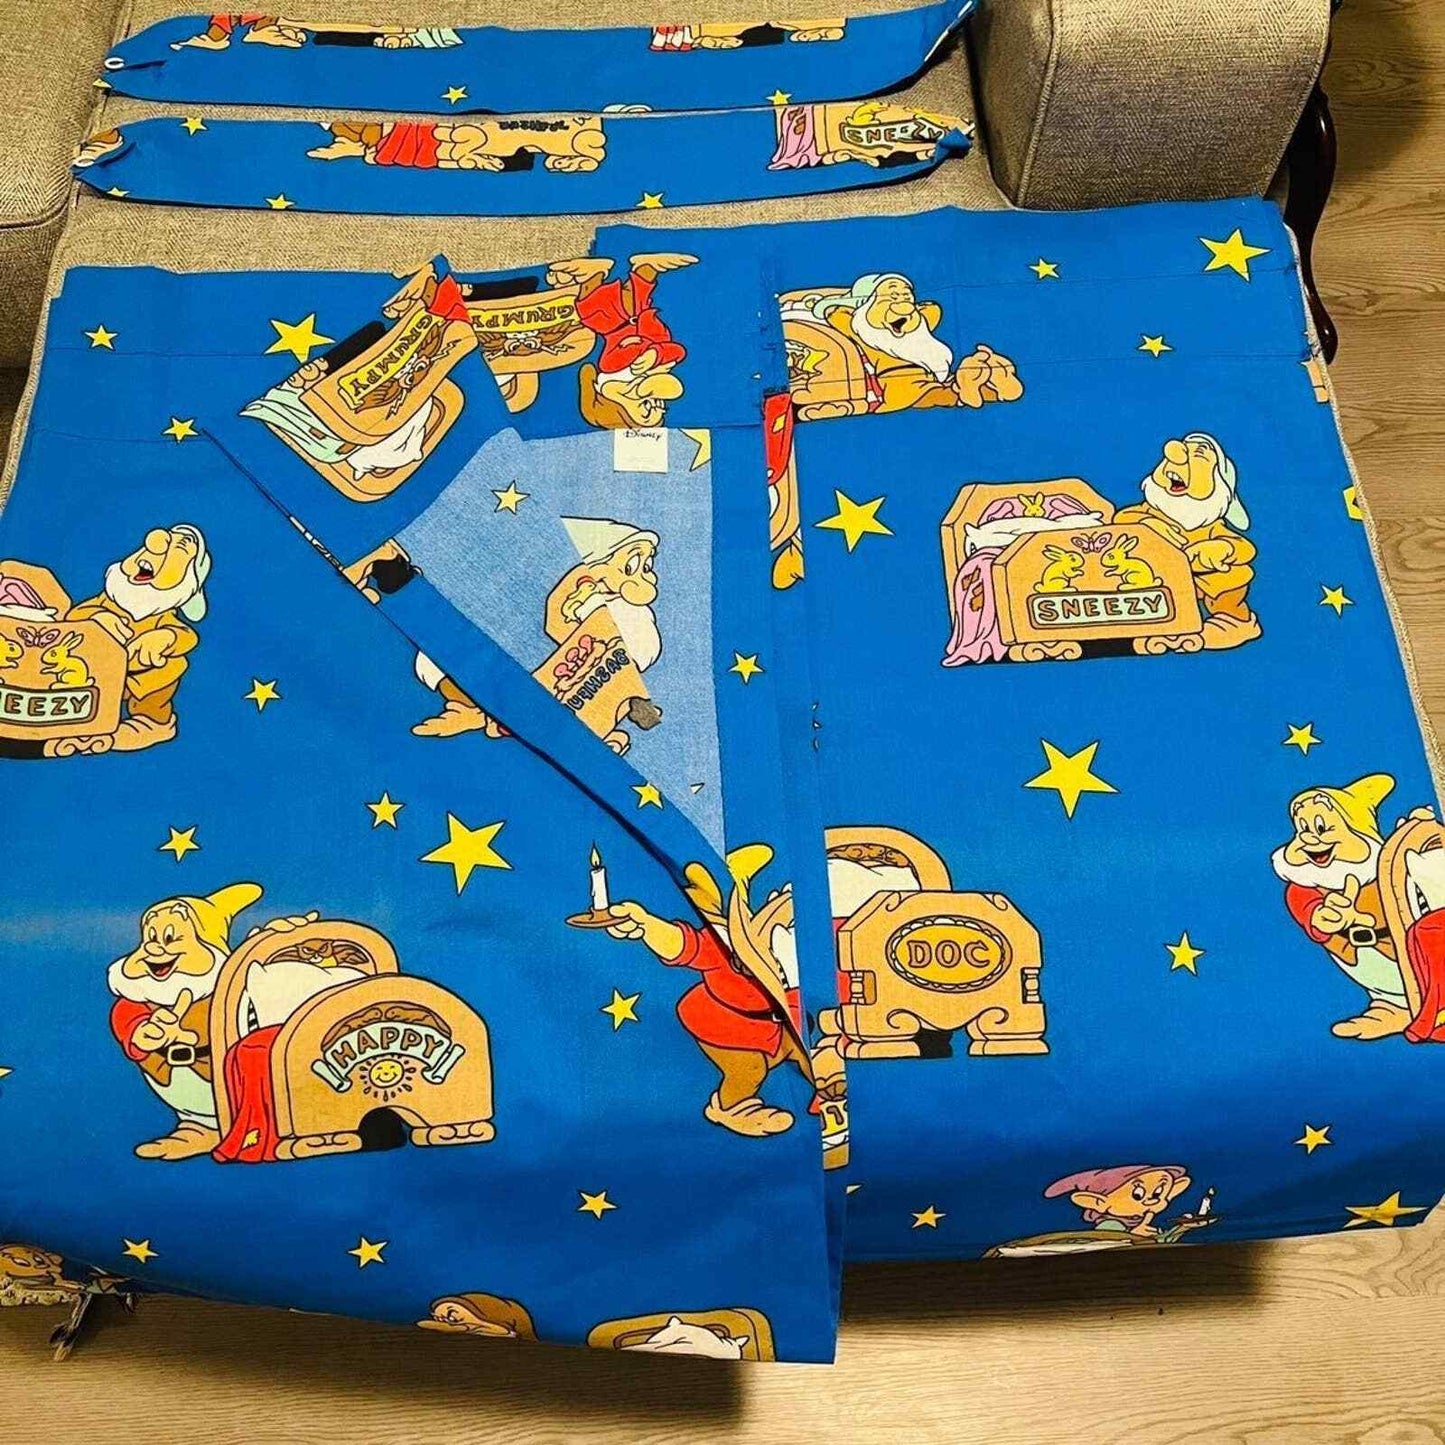 Disney Curtains Children's Room Blue Snow White and the Seven Dwarfs Hanging